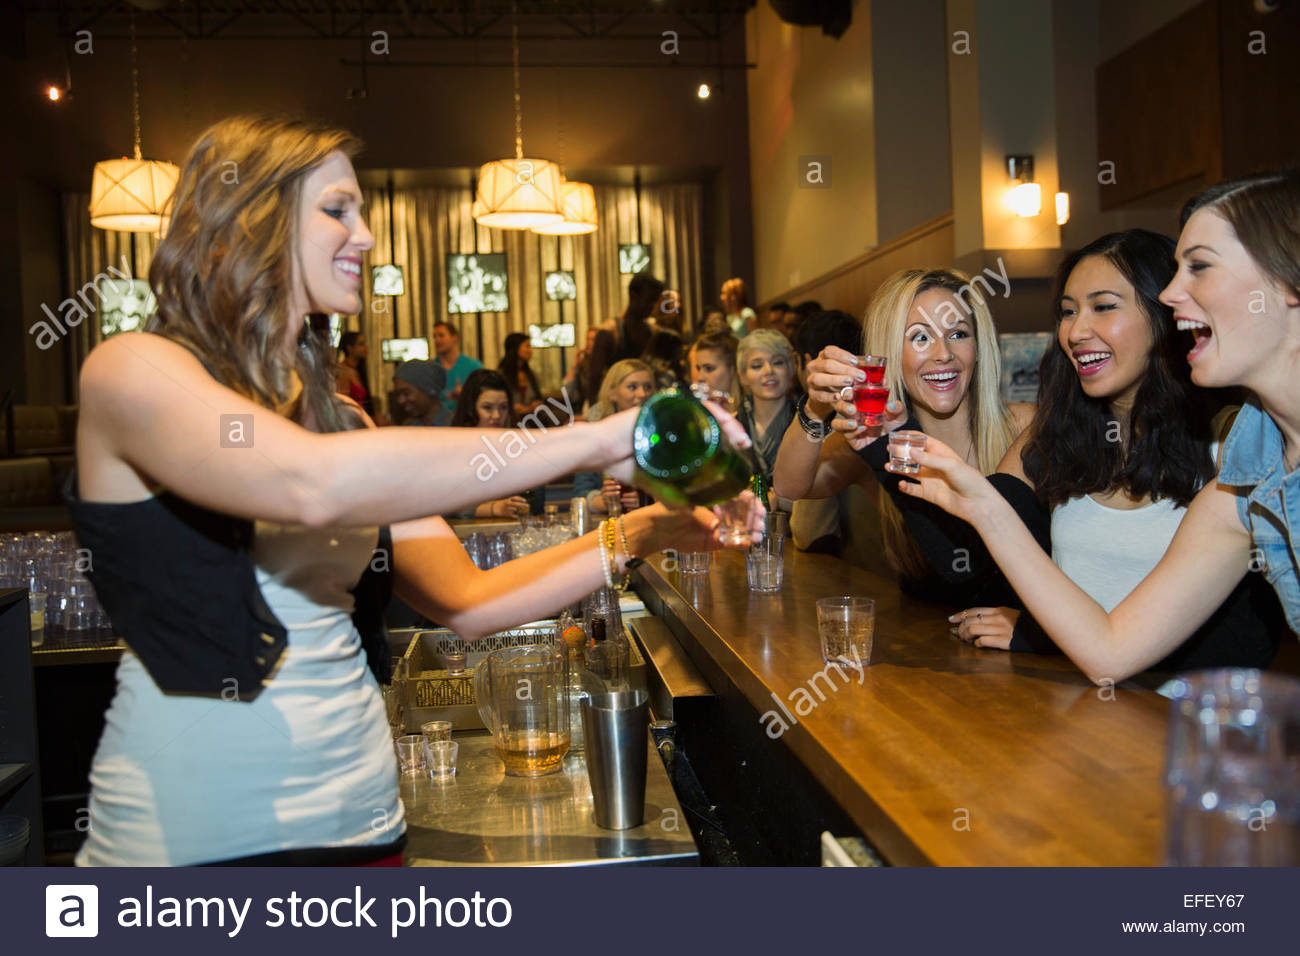 Bartender pouring shots for women at bar Stock Photo